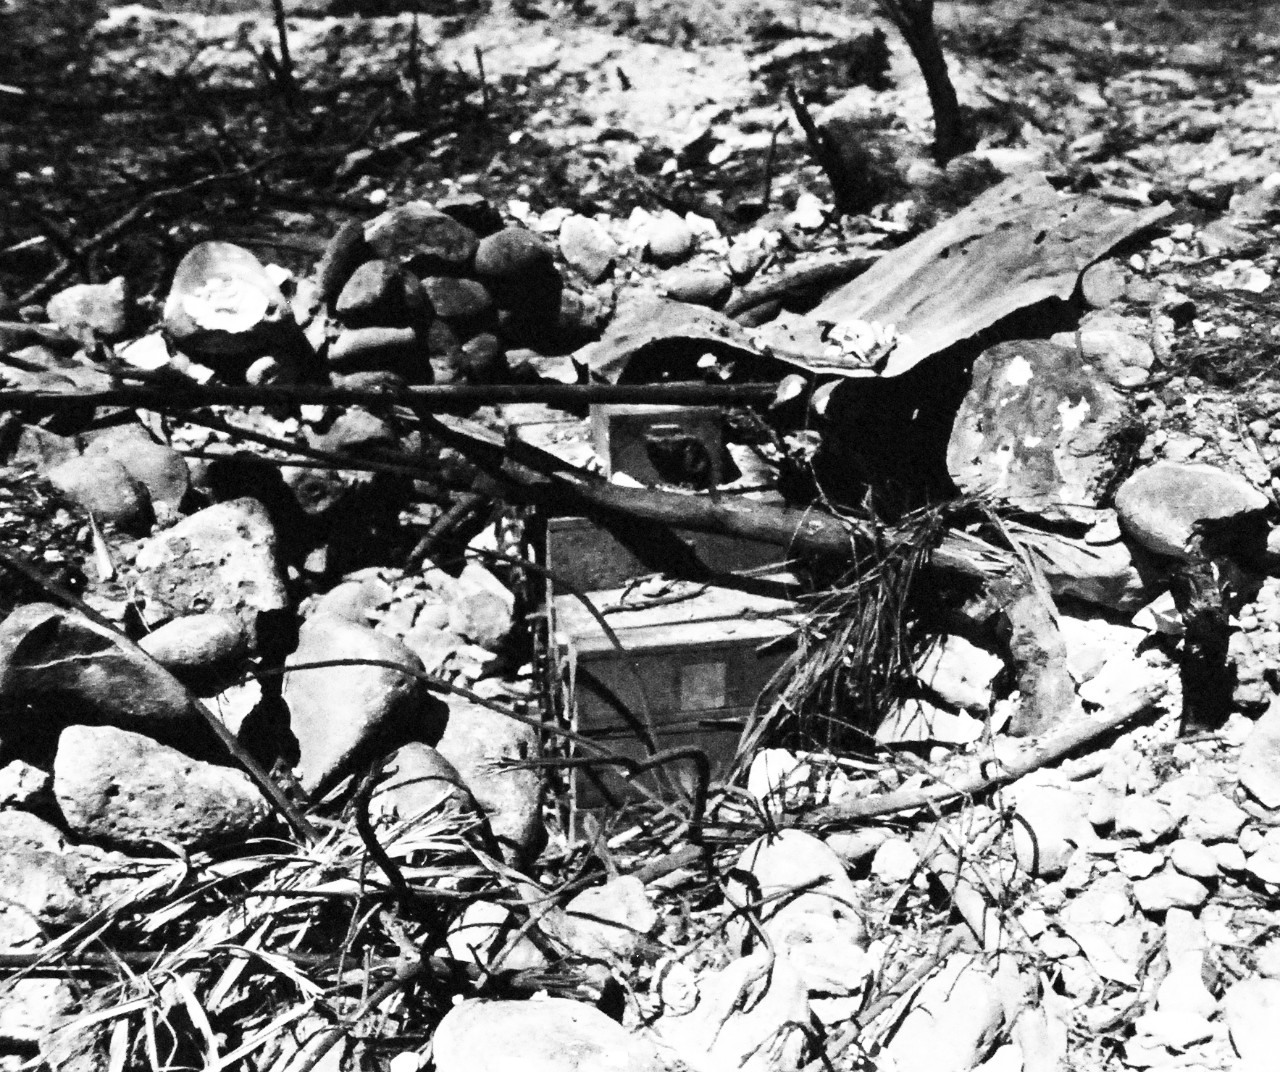 80-G-297110:  Operation Flintlock, January-February 1944.   Shown:  Japanese small ammunition stores on Kwajalein Atoll.  Photograph released January 16, 1945.   Official U.S. Navy Photograph now in the collections of the National Archives.  (2016/01/19).